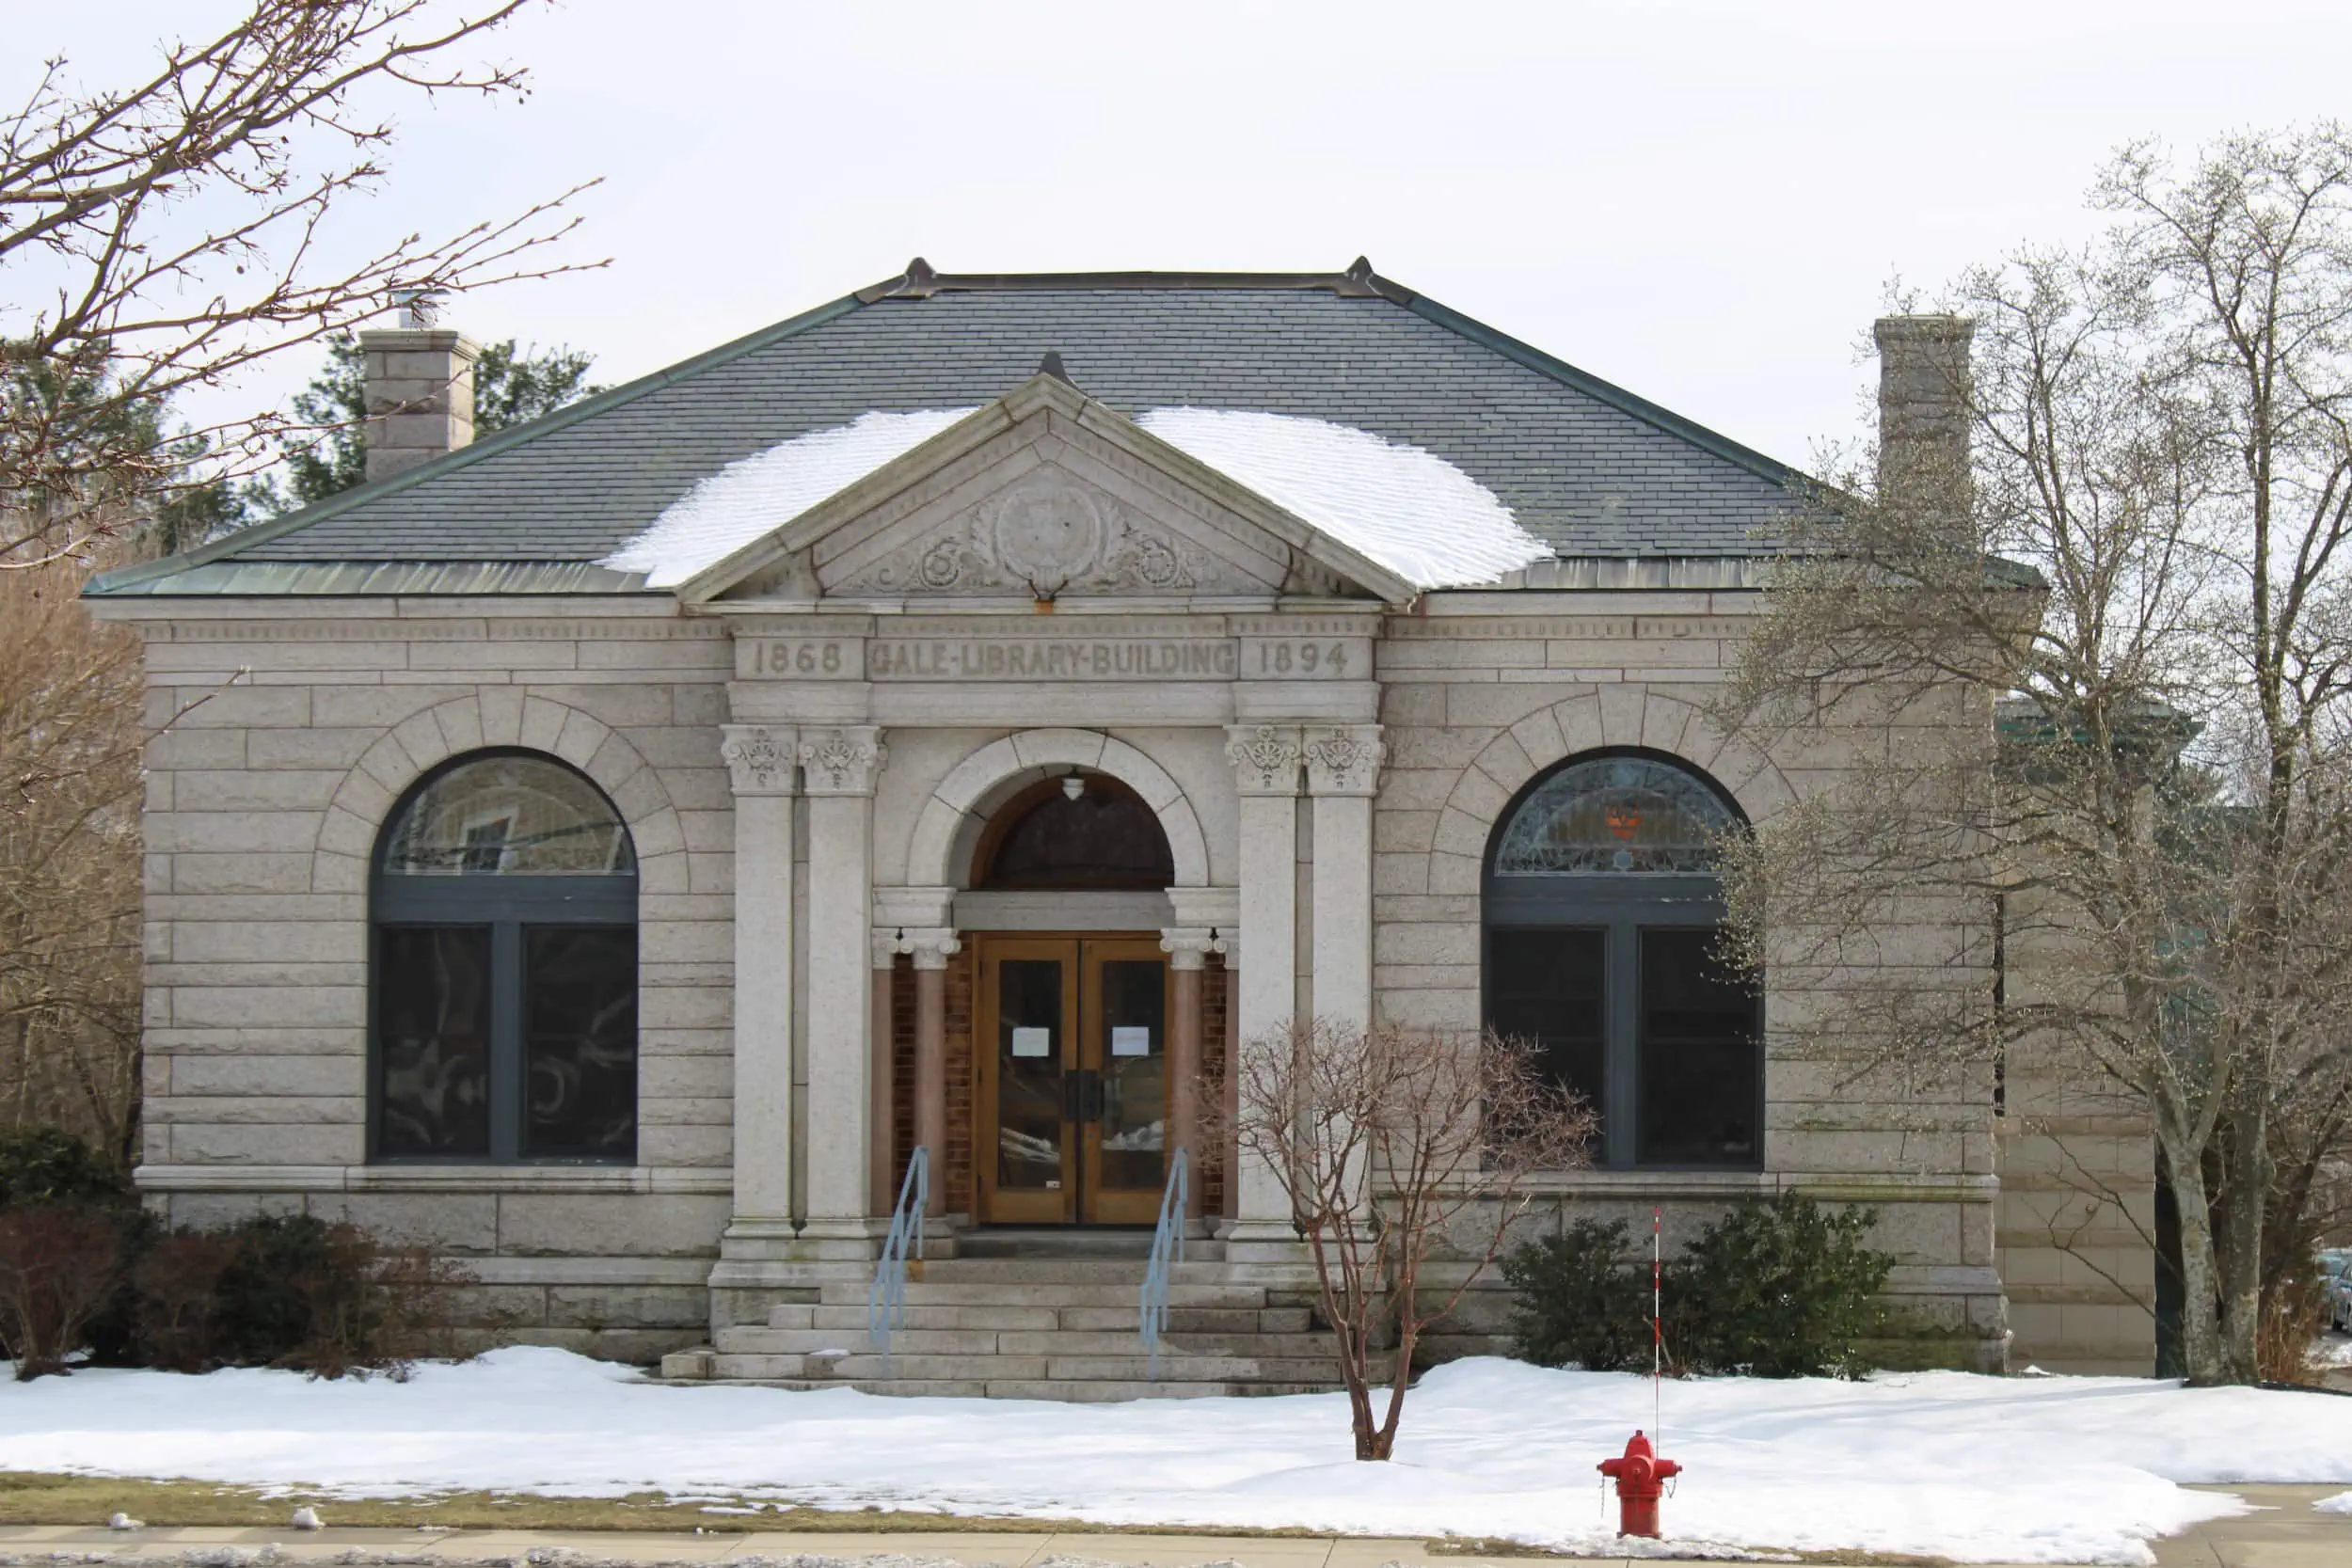 Northborough has a long legacy of public libraries